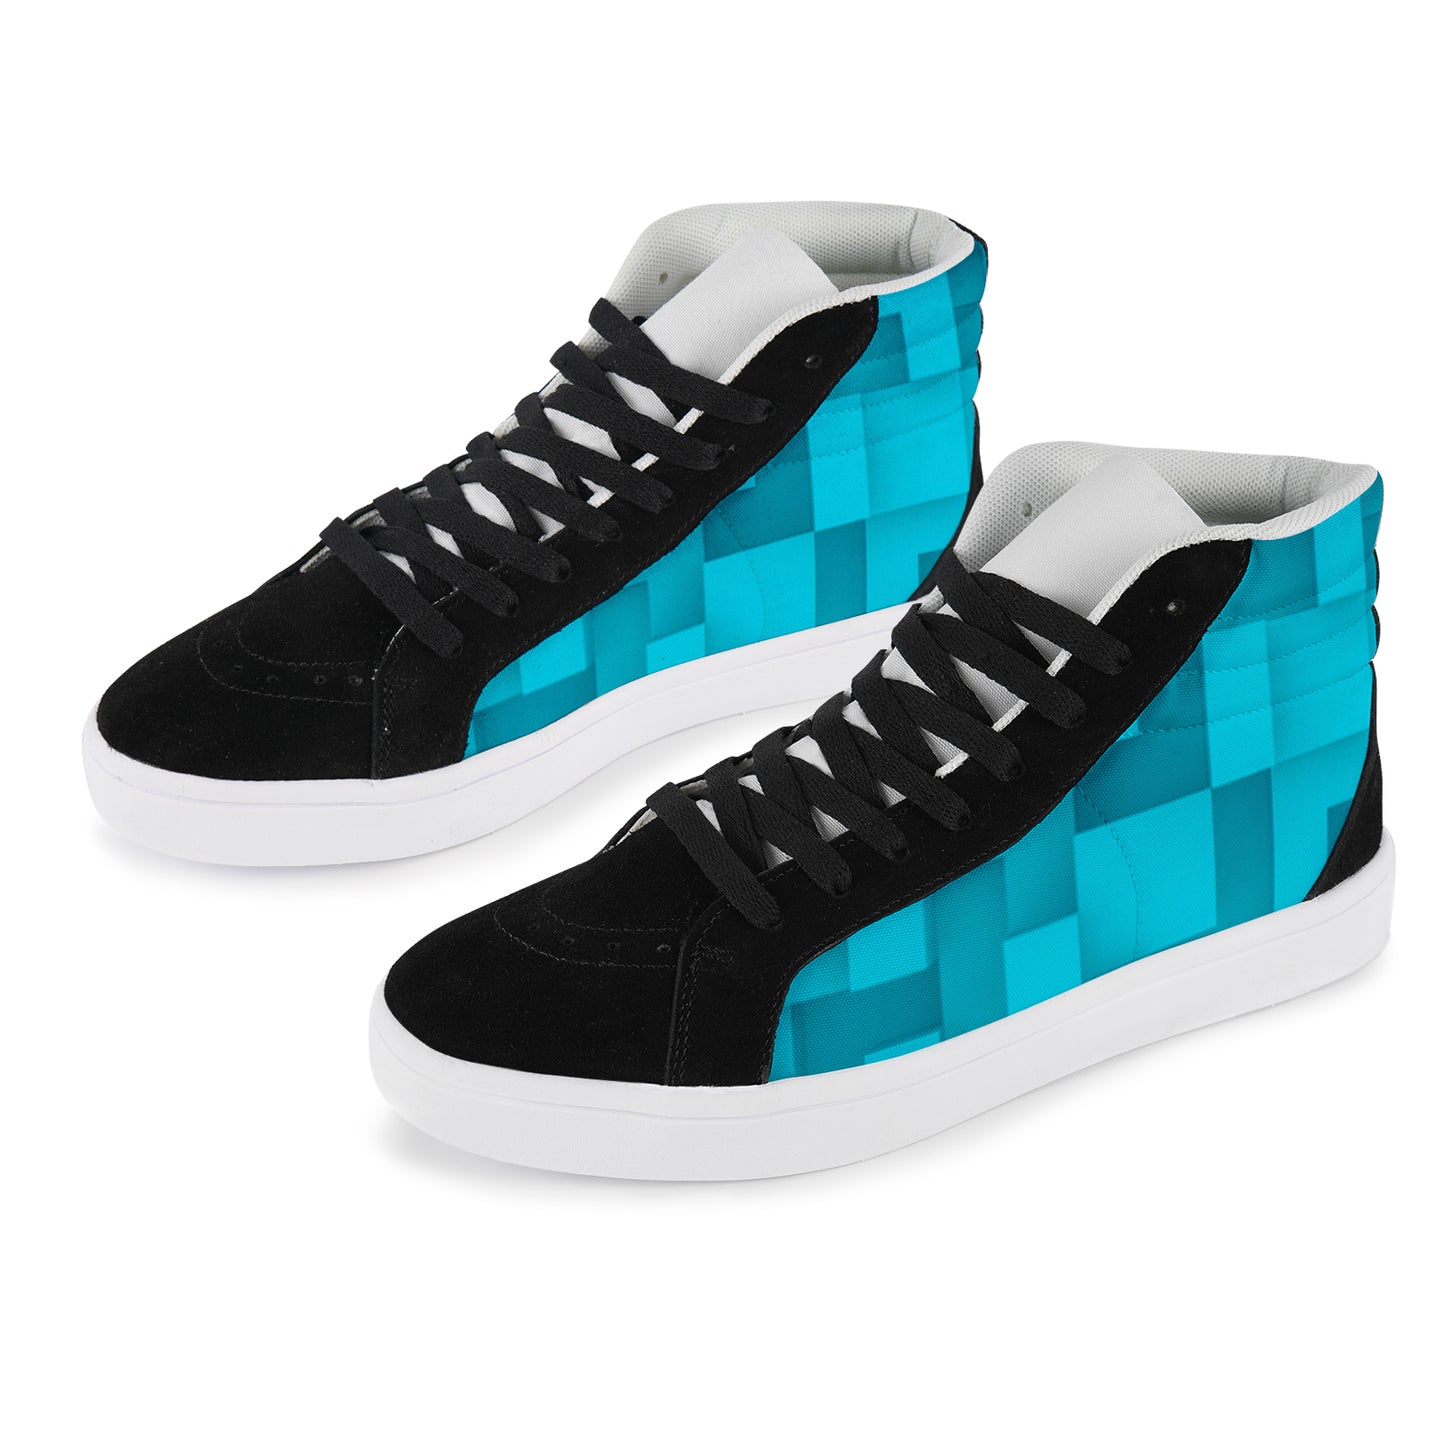 Women's High Tops - Turquoise Cubes